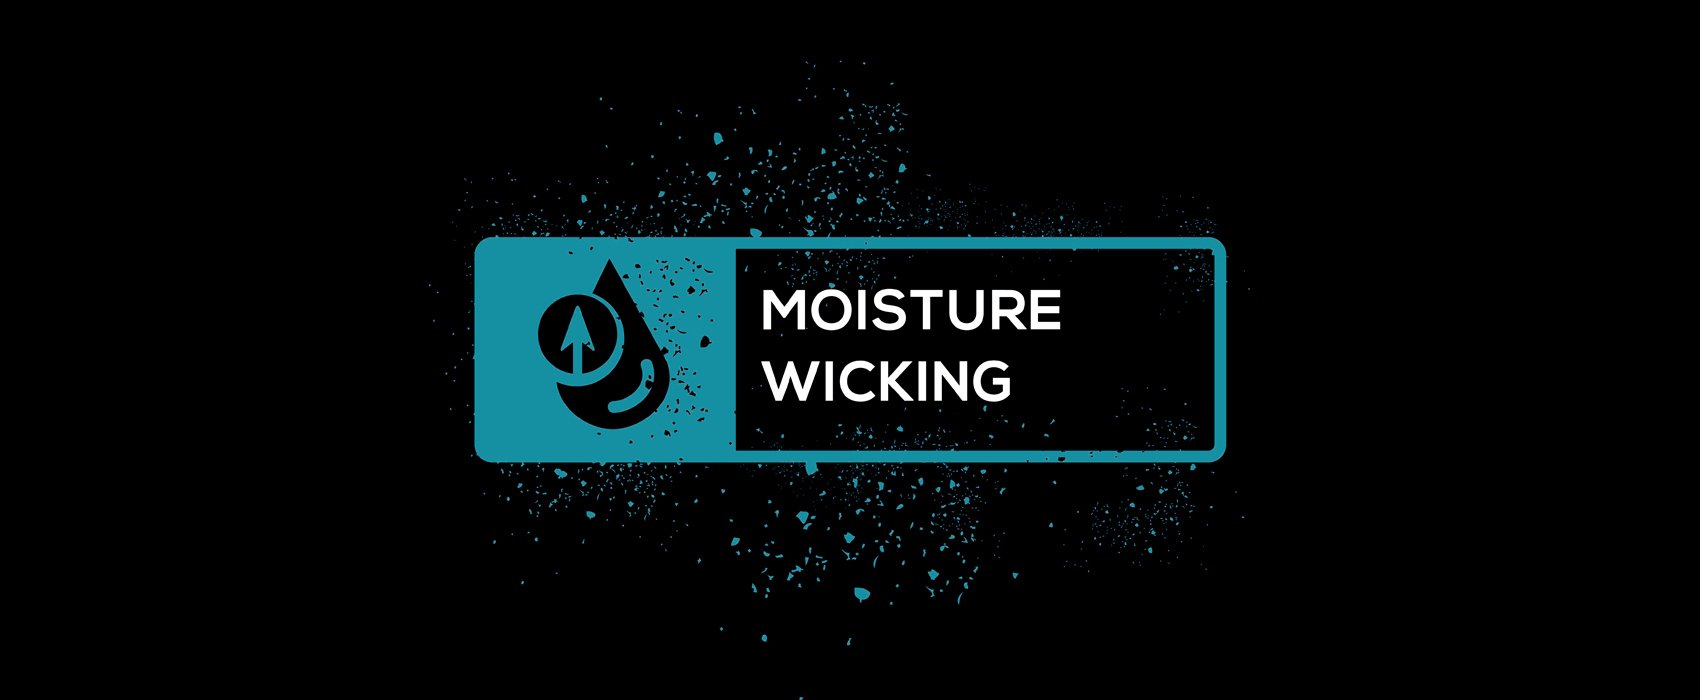 What Is Moisture Wicking and How Does It Work?.